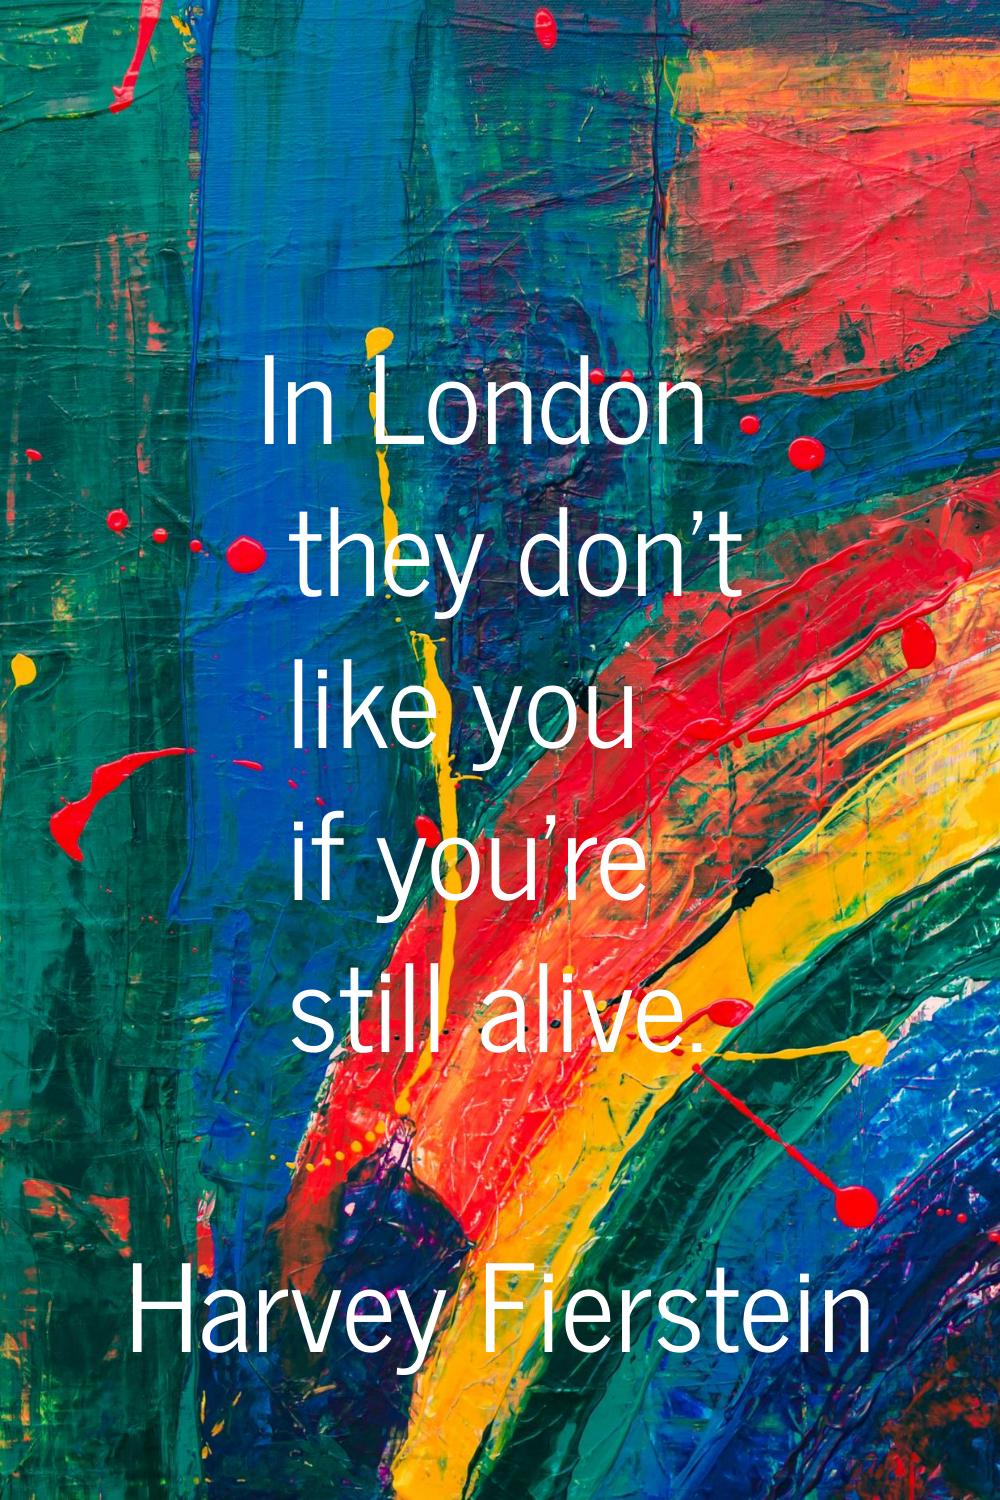 In London they don't like you if you're still alive.